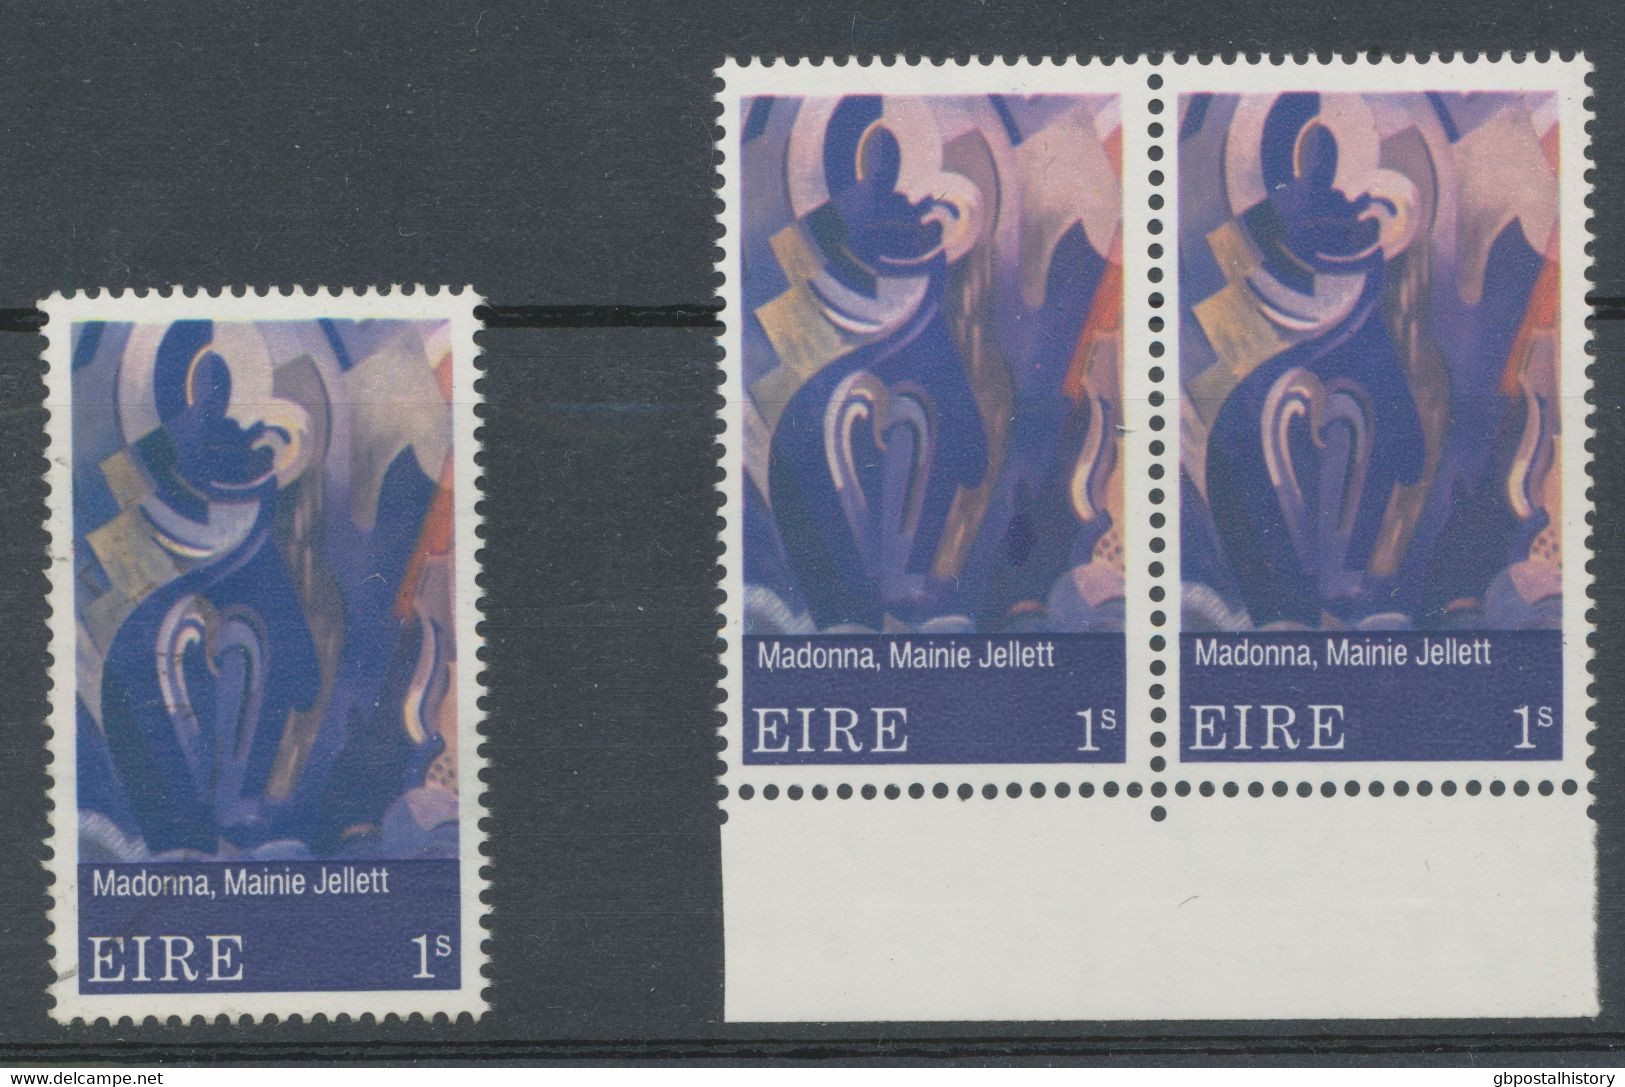 IRELAND 1970 Contemporary Irish Art 1S Superb Used MAJOR VARIETY COLOR PINK On The Left Stamp Is Almost Complete MISSING - Gebraucht